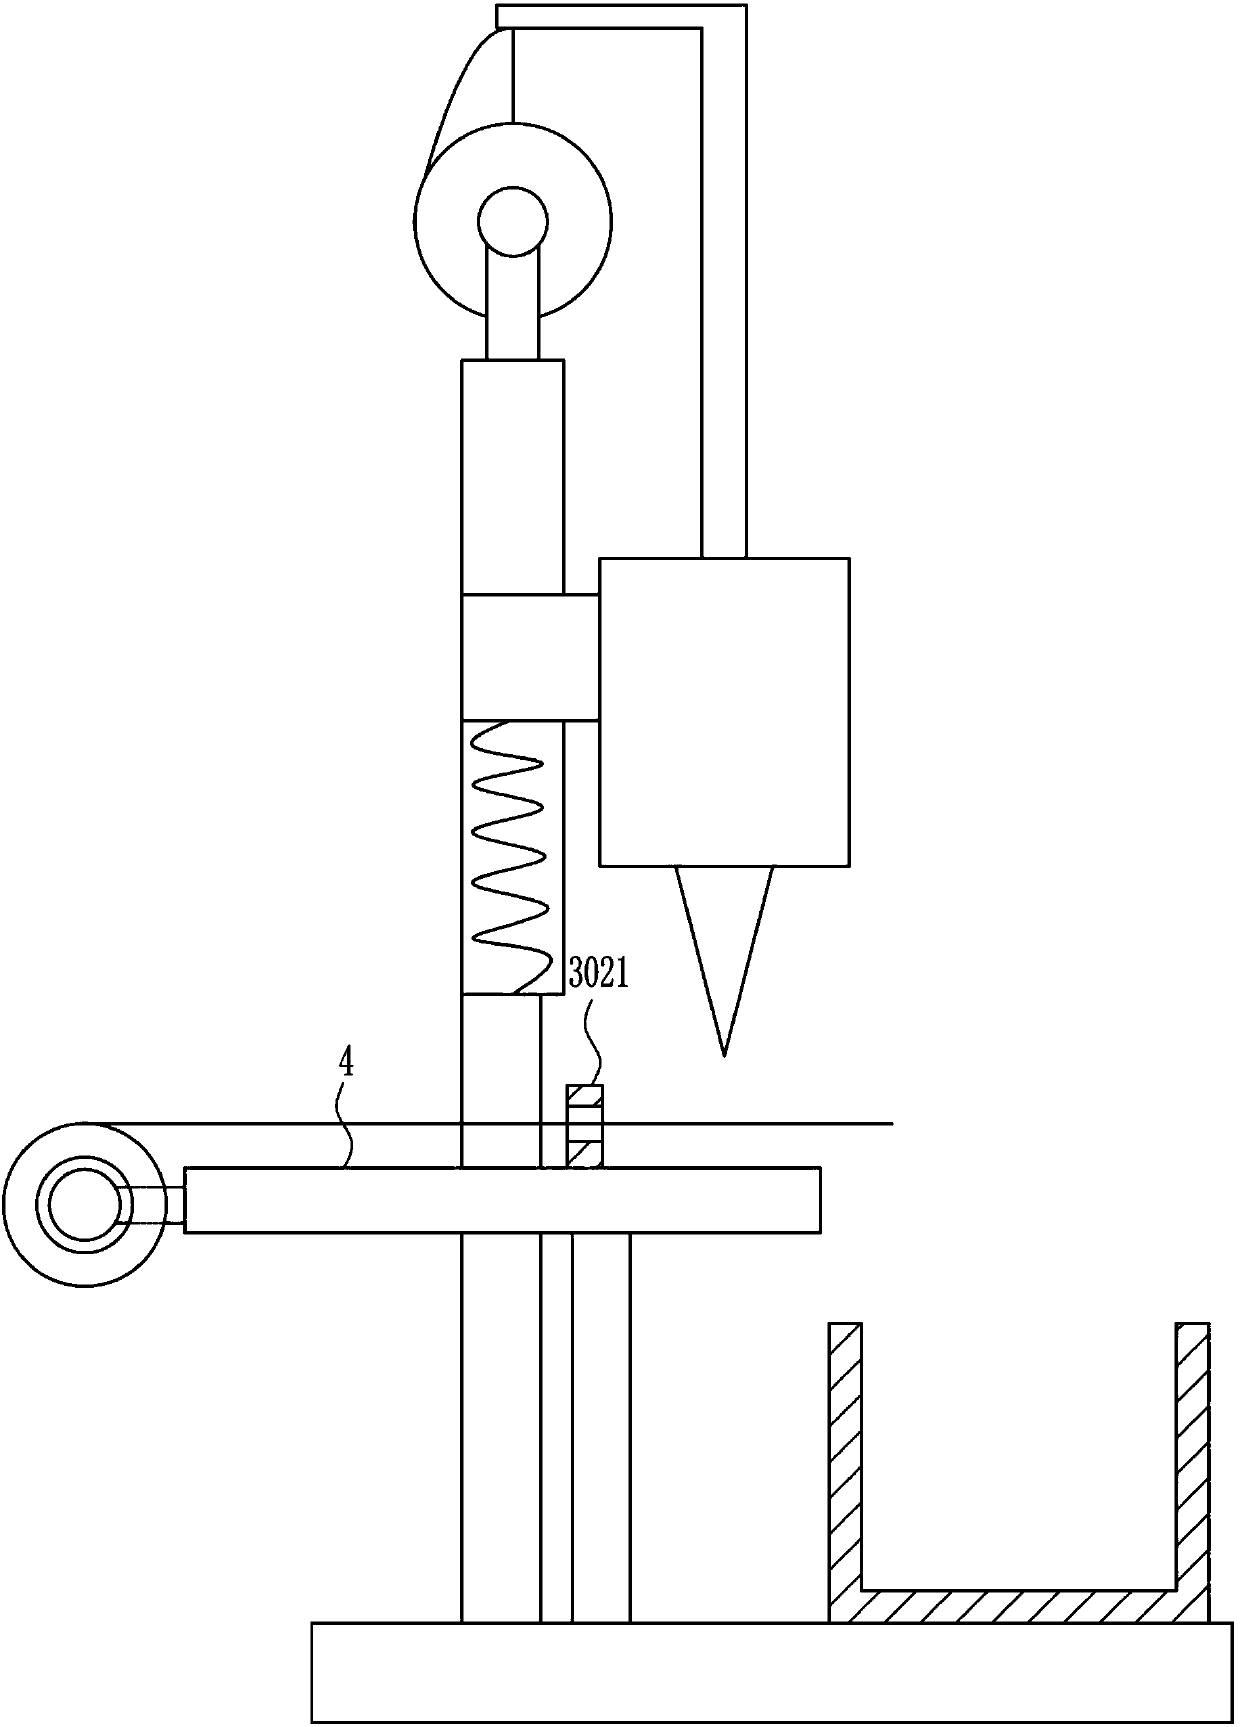 Industrial cutting equipment for performing fixed-length cutting on different cables